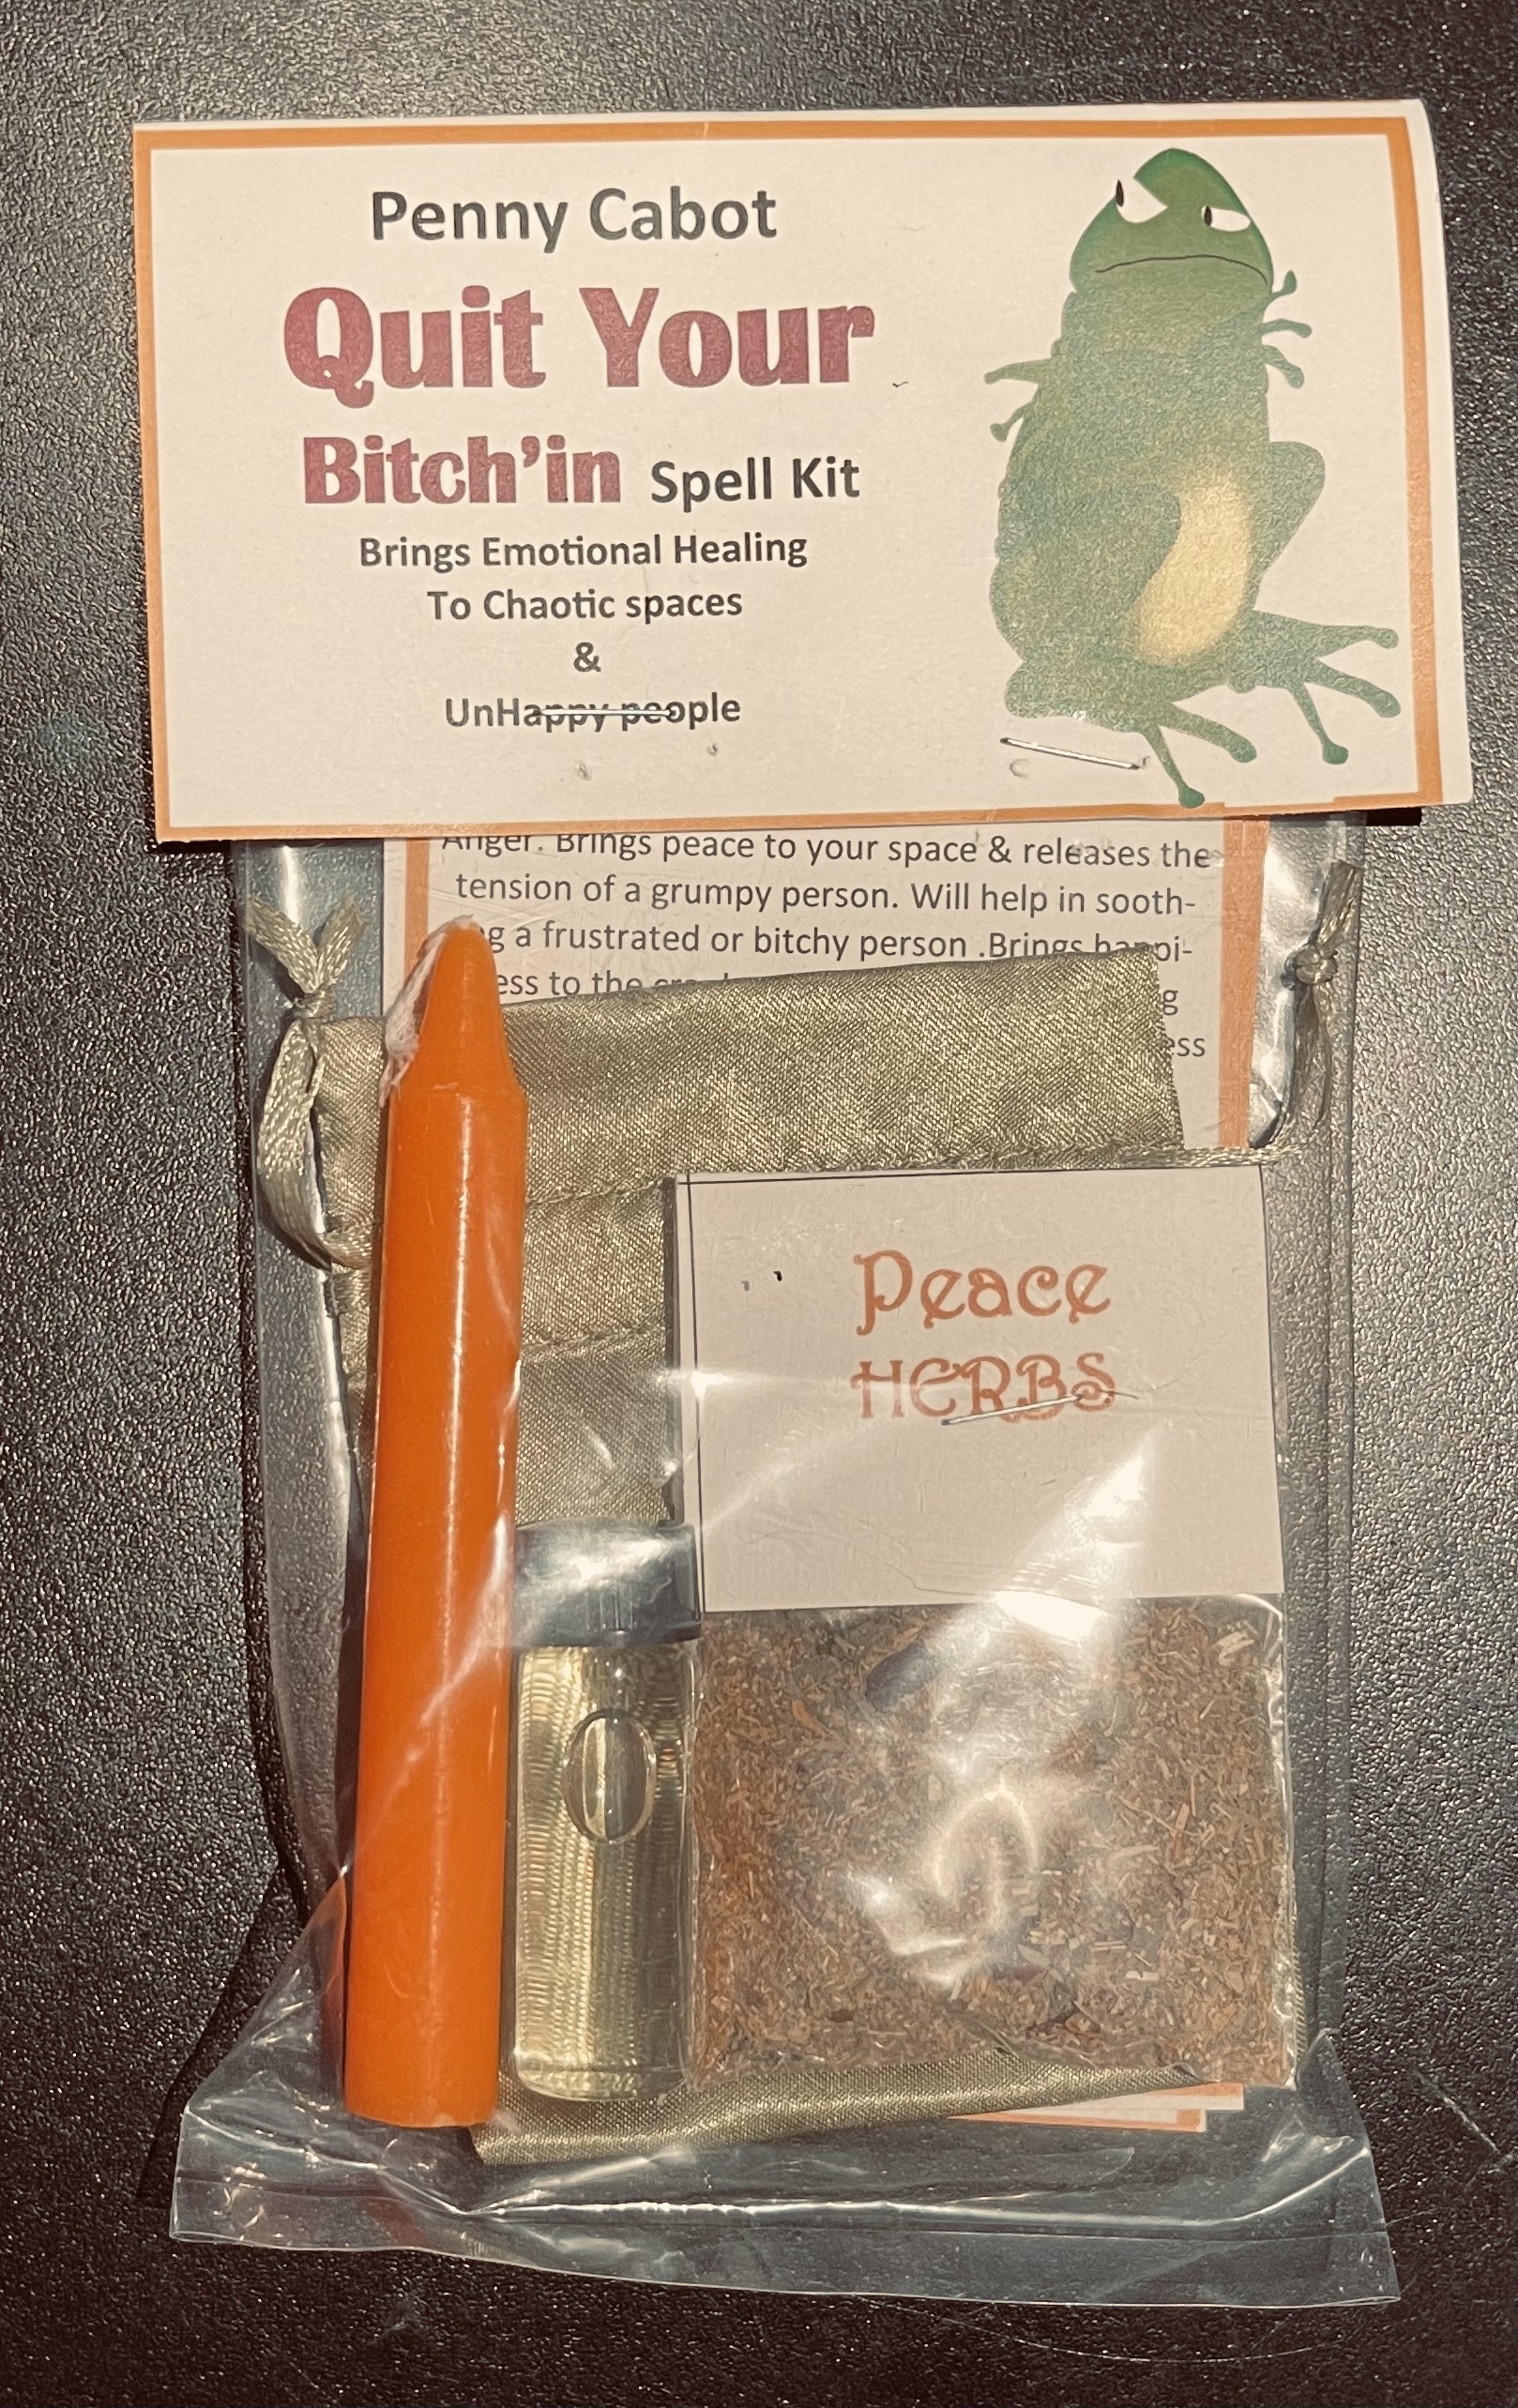 Quit Your Bitch'in Spell Kit by Penny Cabot - Click Image to Close